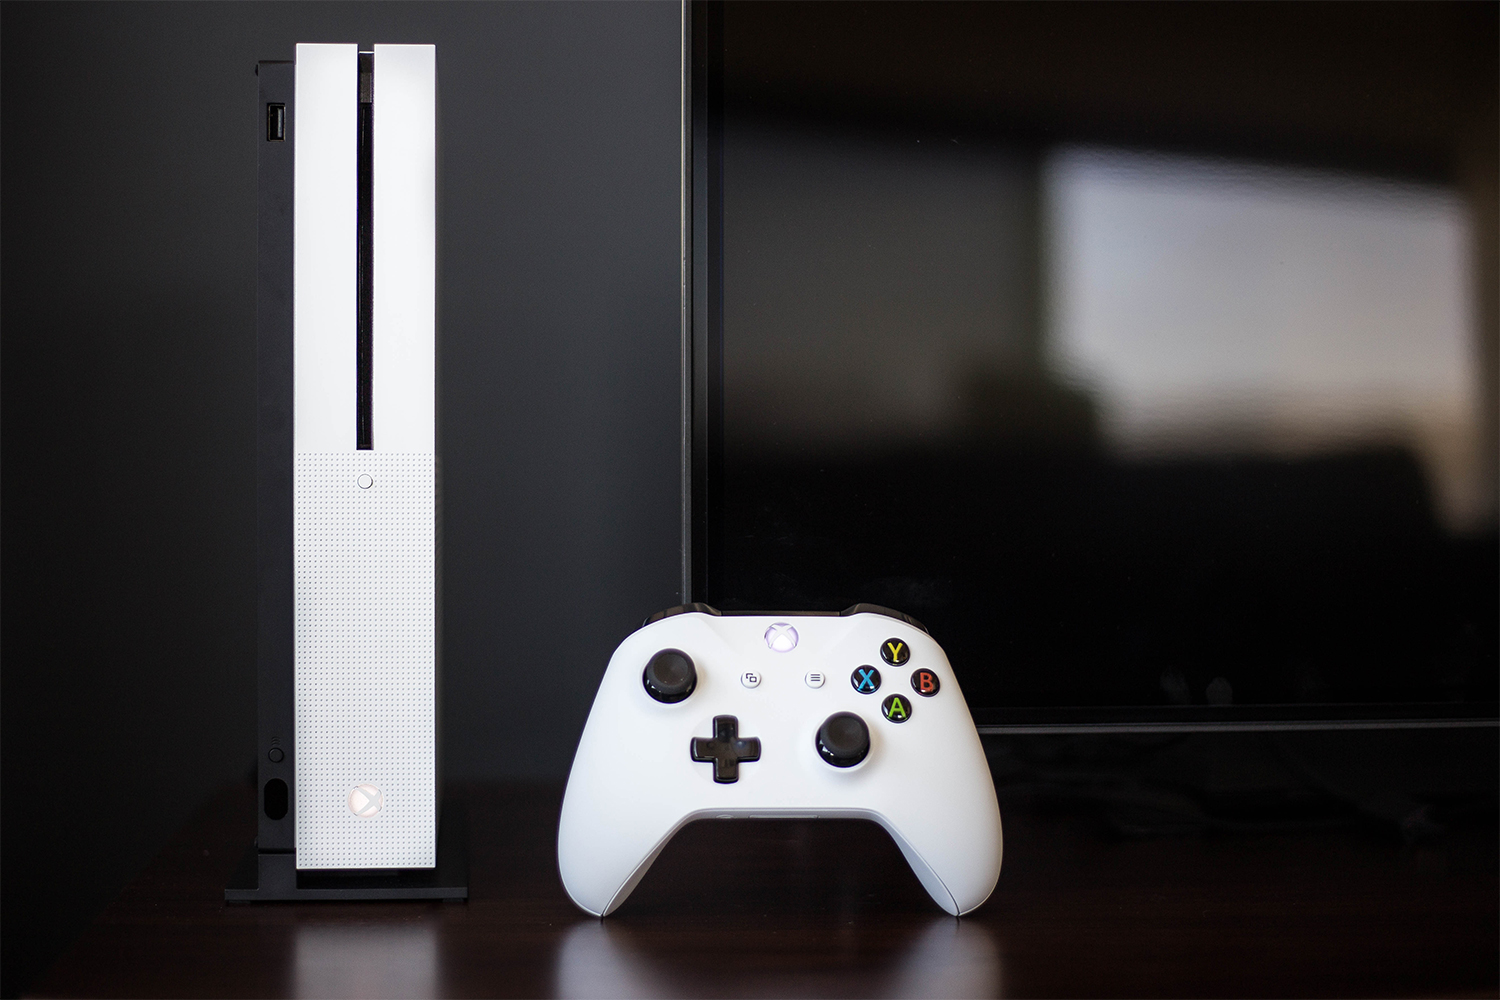 Xbox One S review: A slimmer gaming console but not a required upgrade